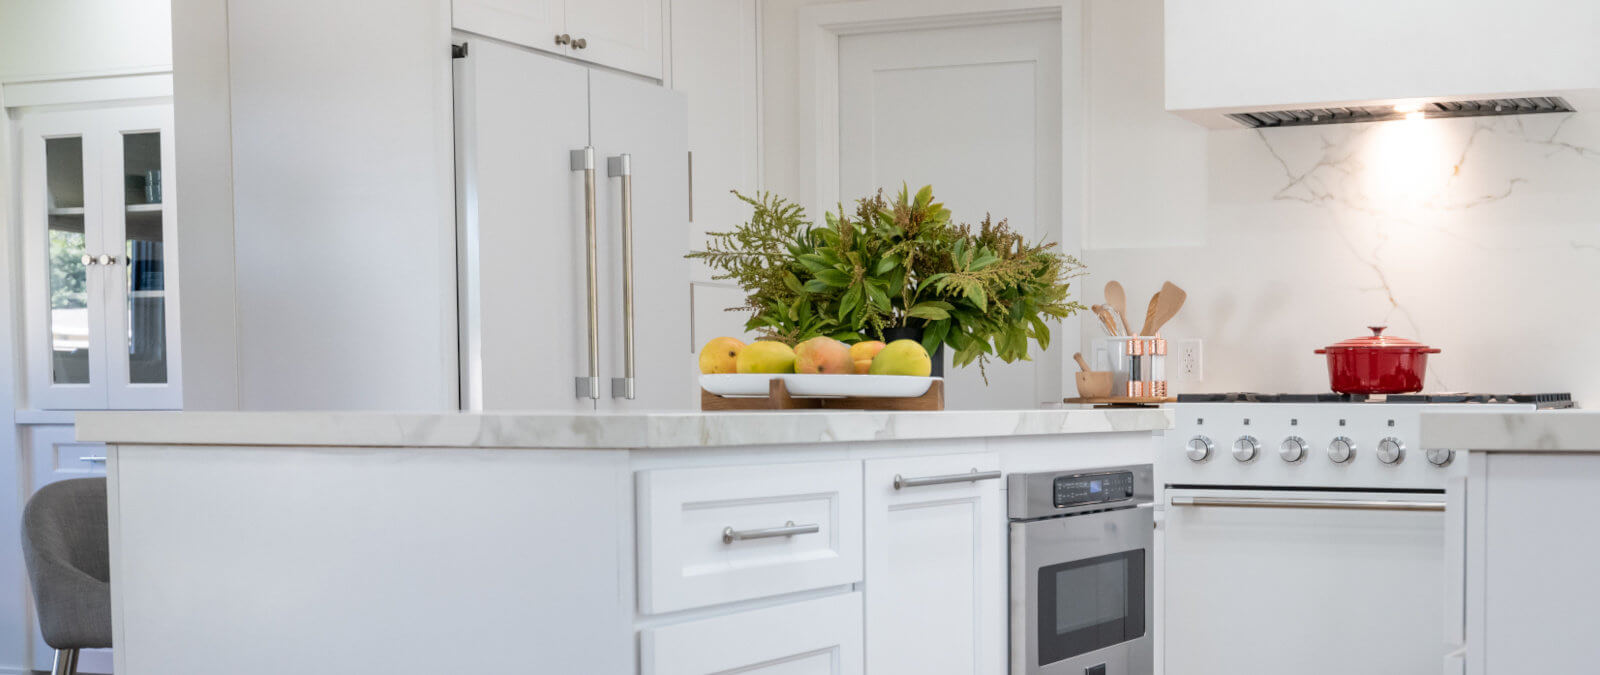 Kitchen Cabinet Distributors – You provide the space. We'll ...